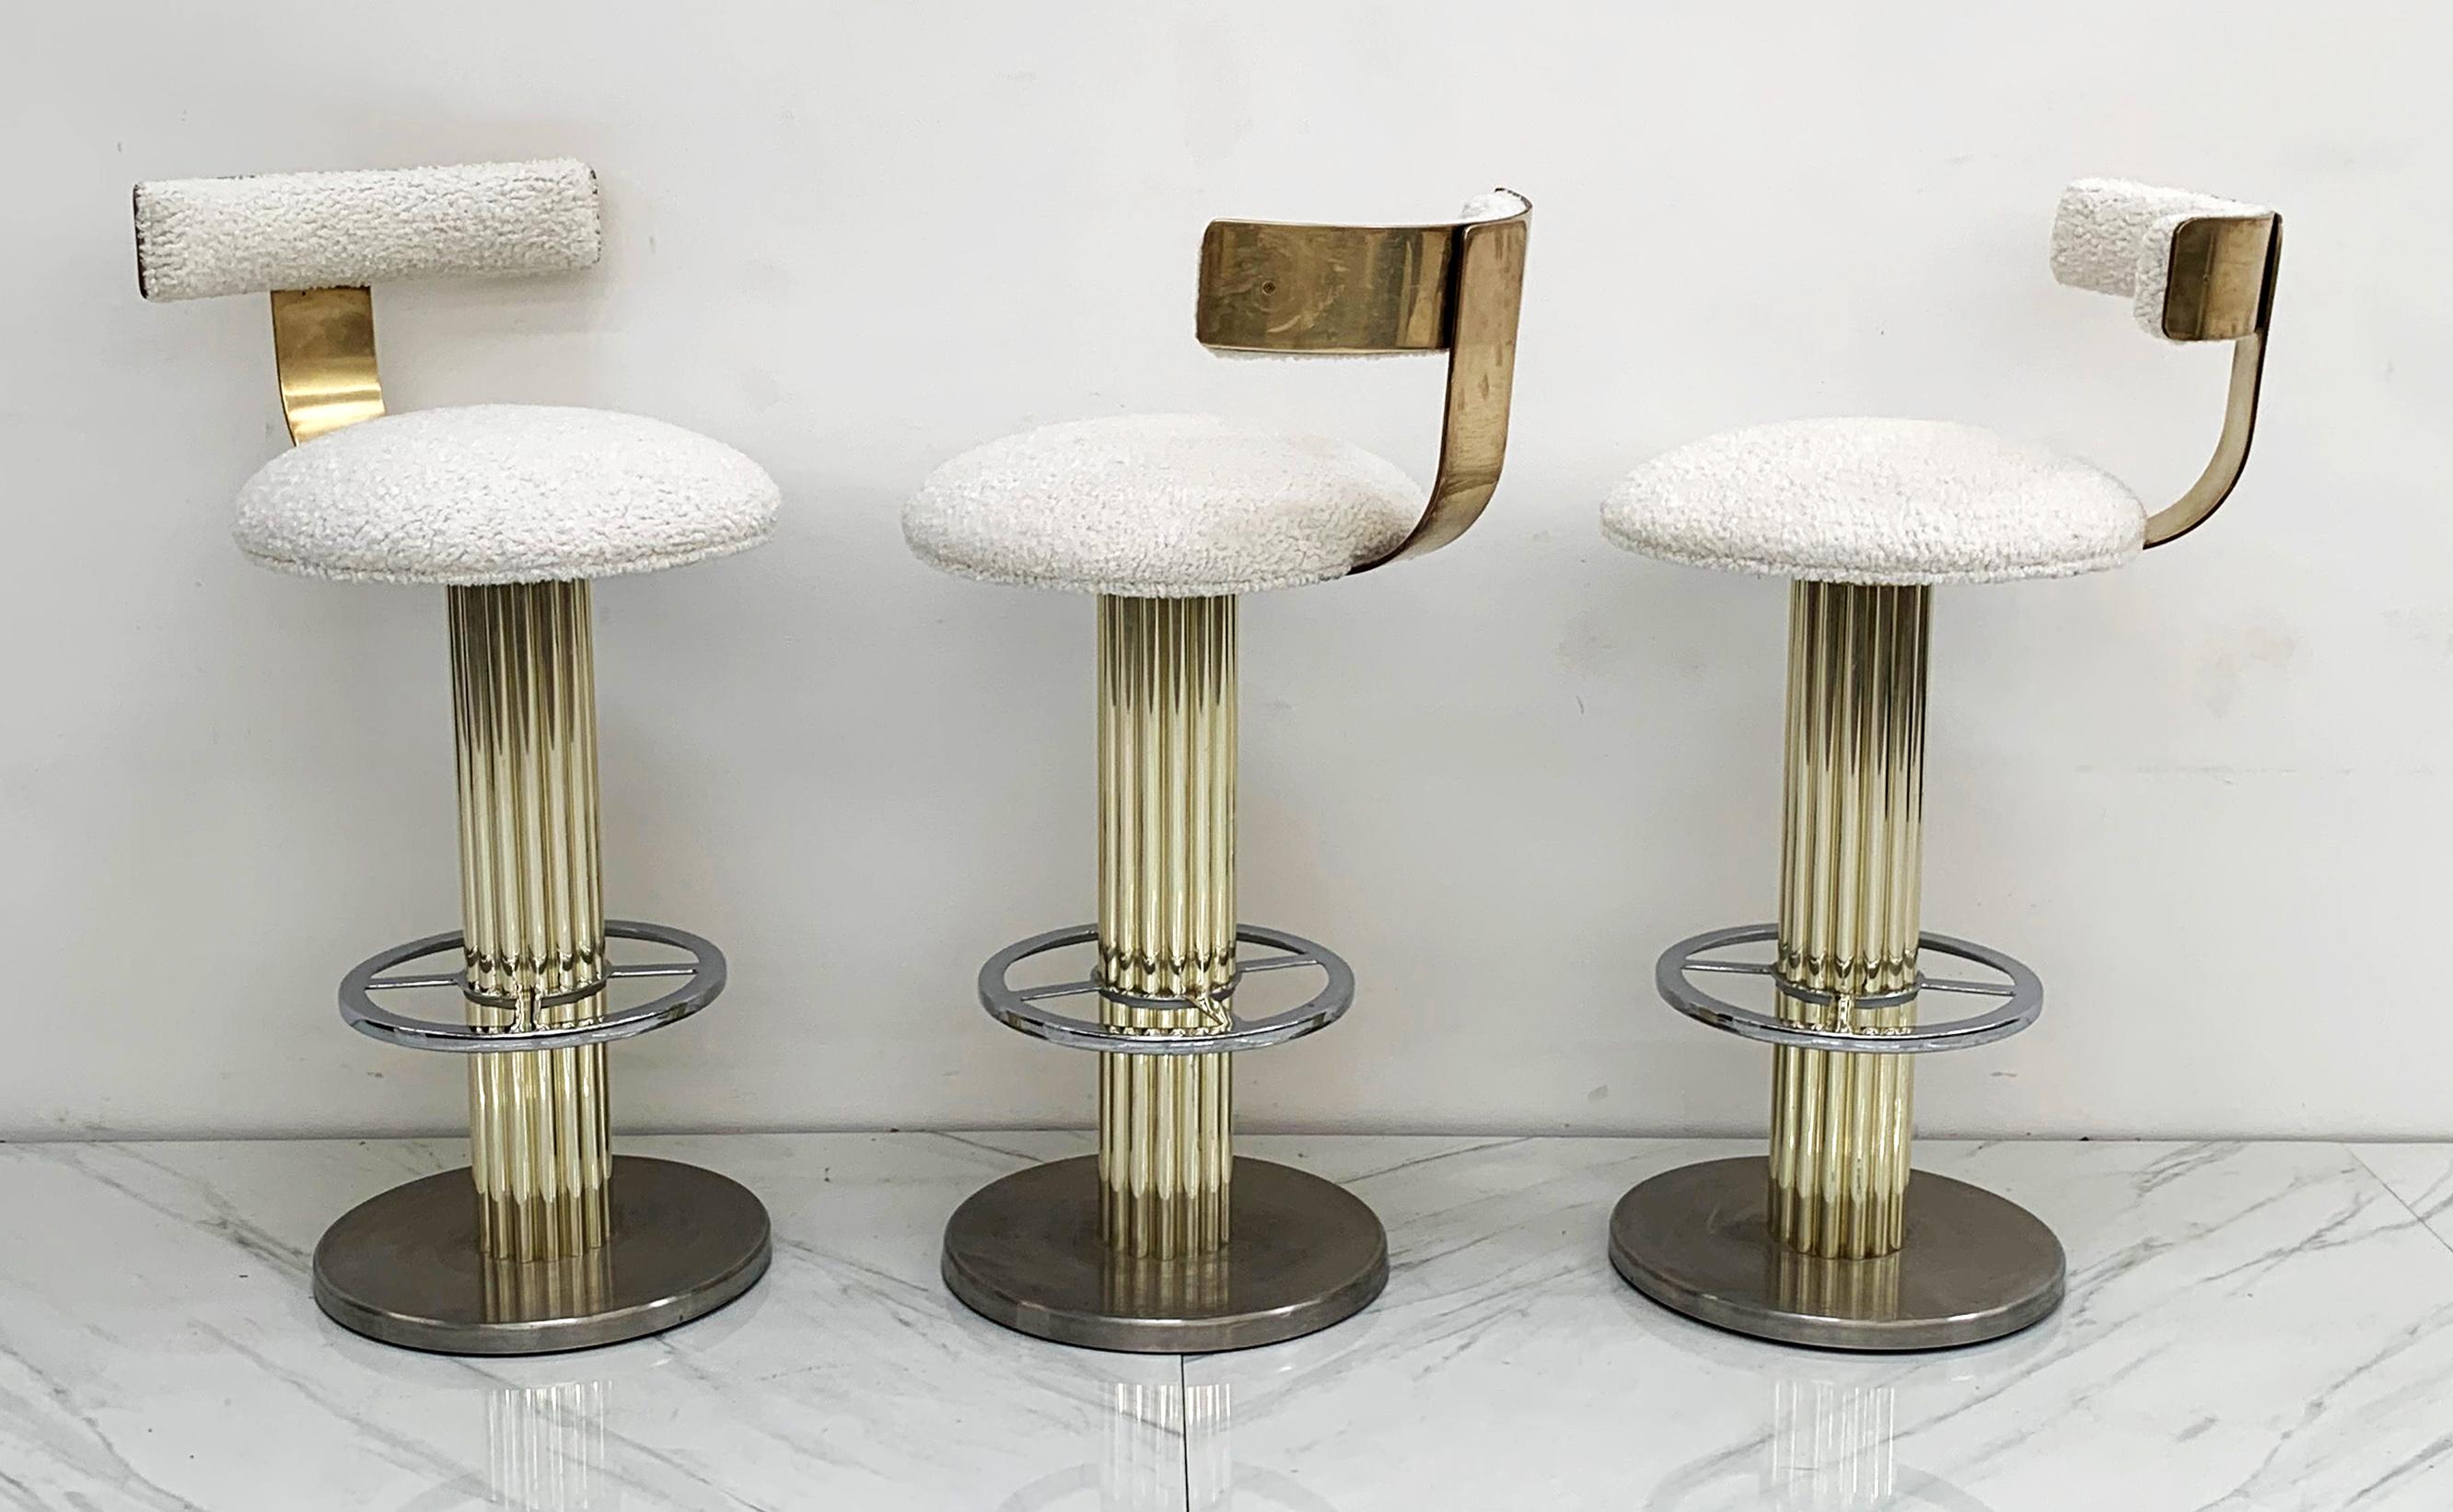 These bar stools are absolutely stunning! Designs for Leisure, was a high end seating source for interior design trade from 1980's and 90's and really took design to new heights with these barstools. This particular set is a rare two tone set, with